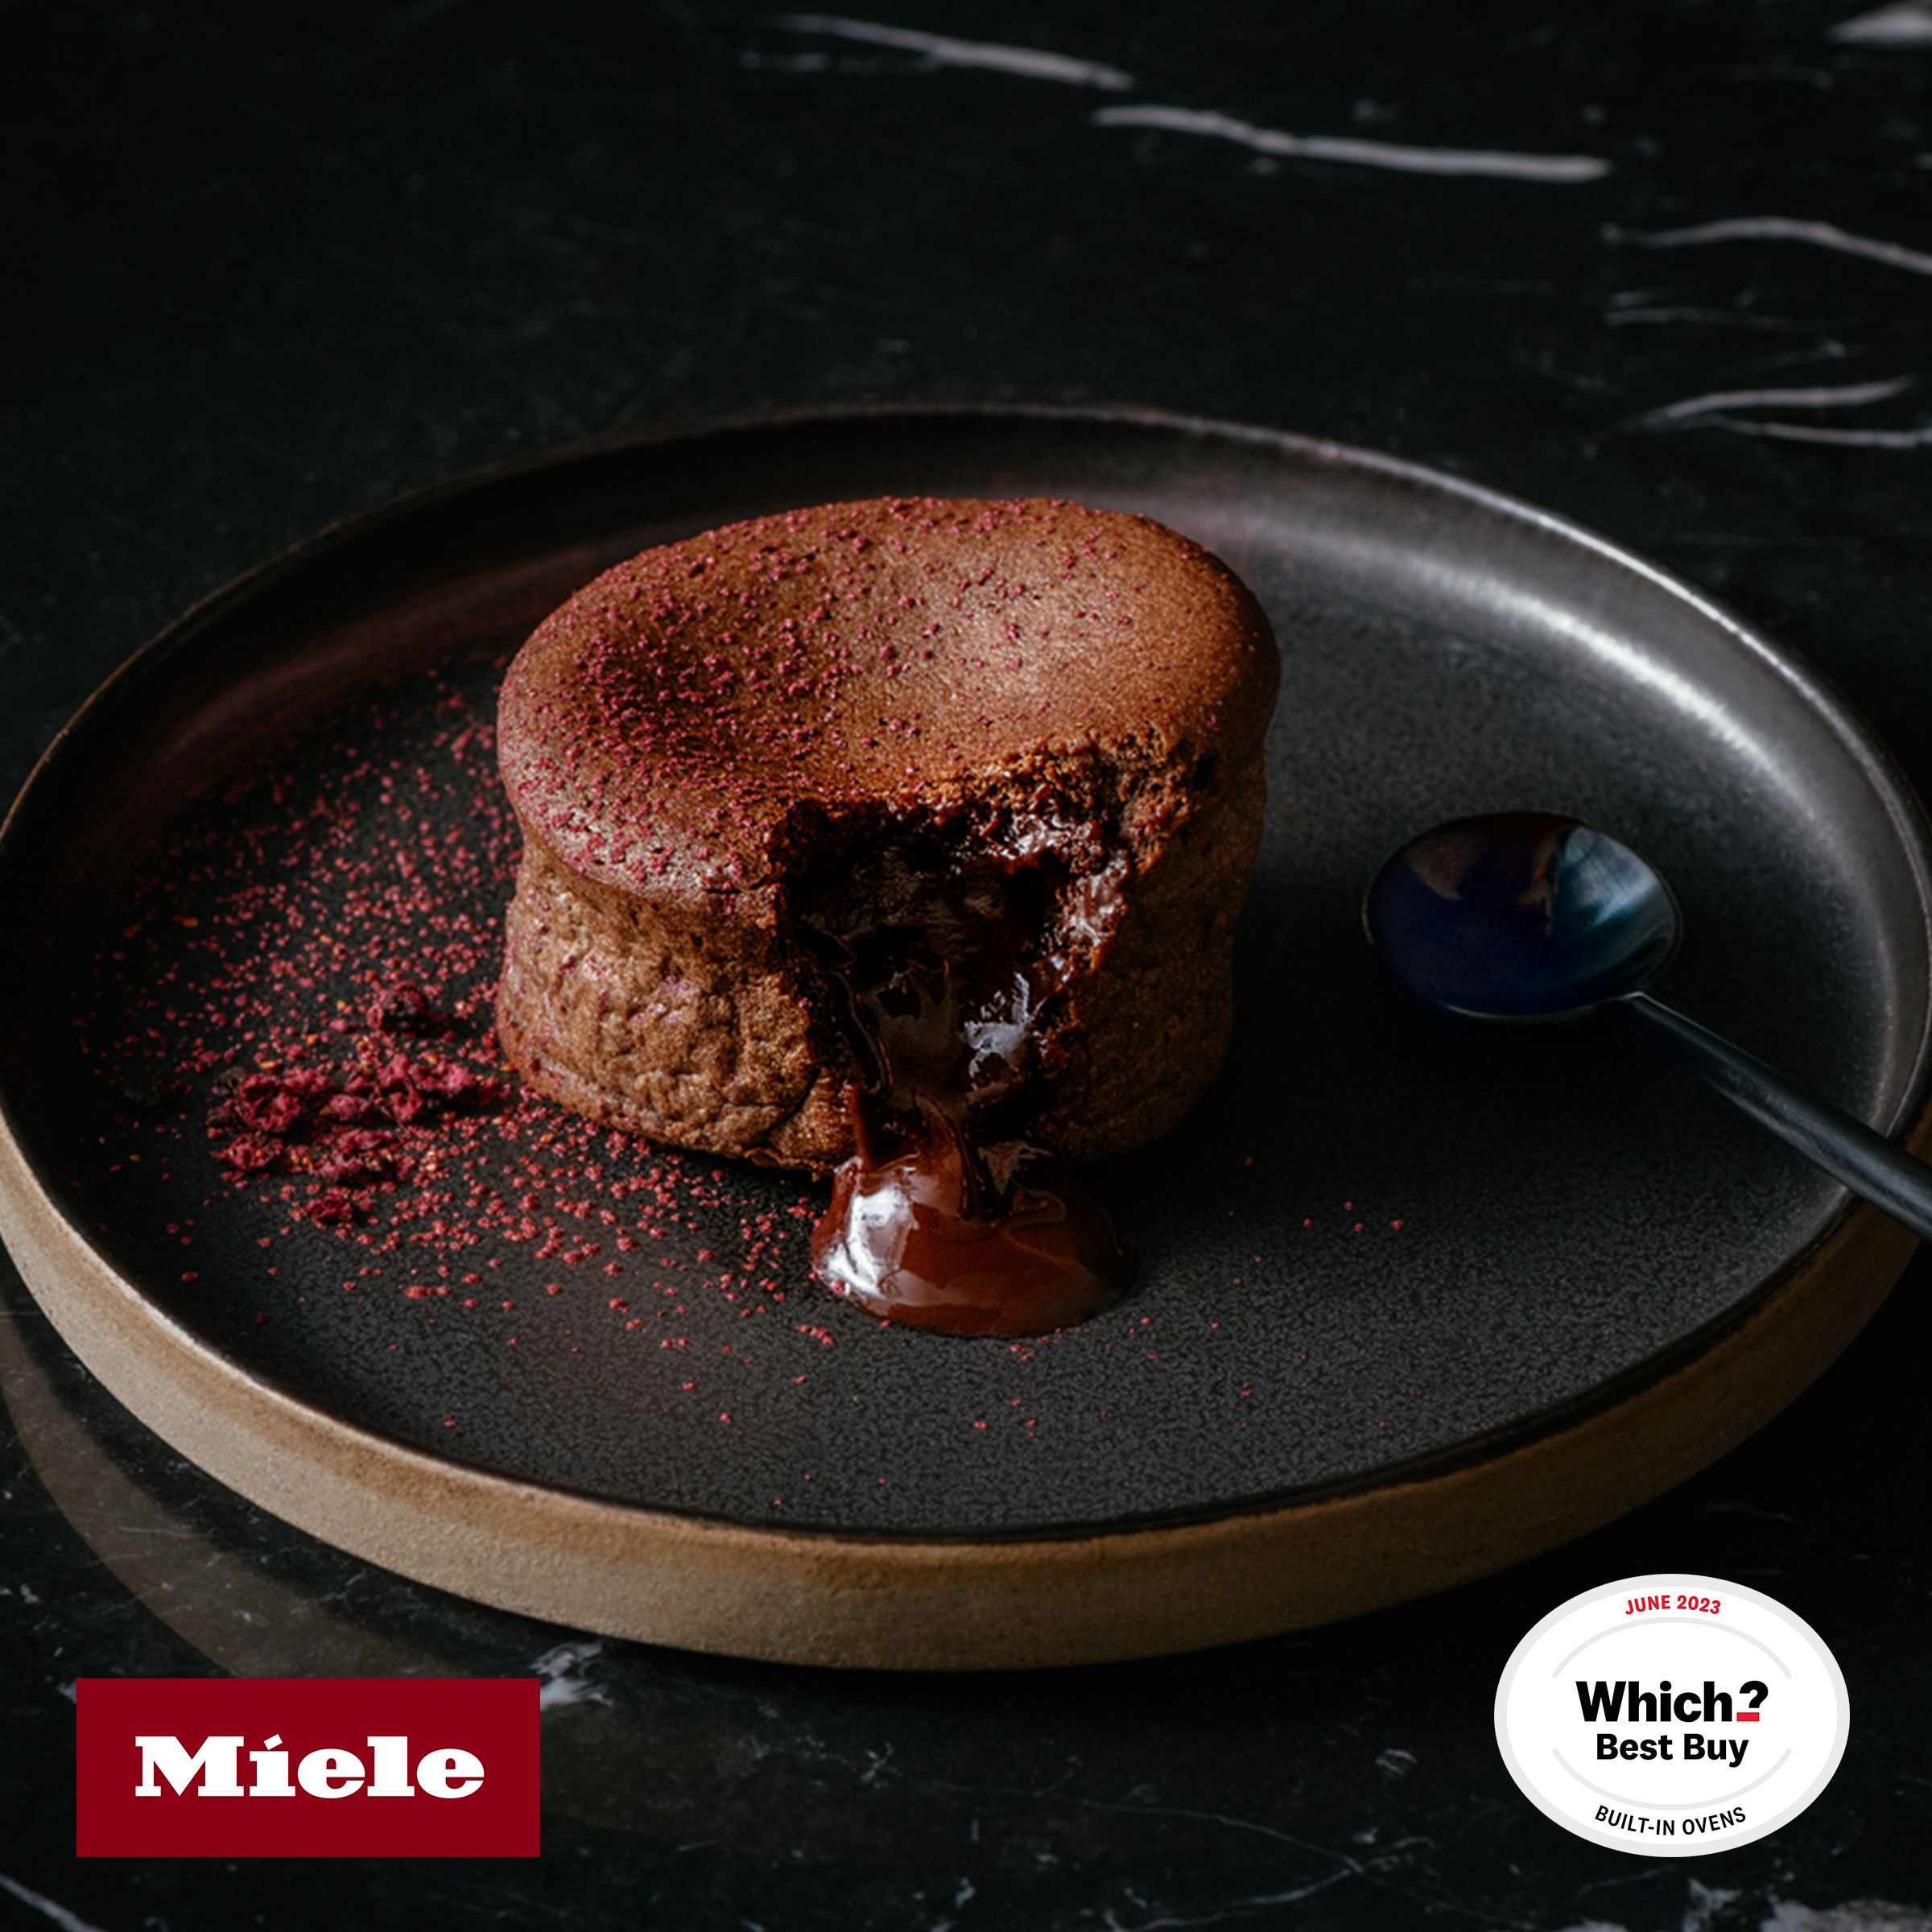 Miele cooker showing a molten lava cake